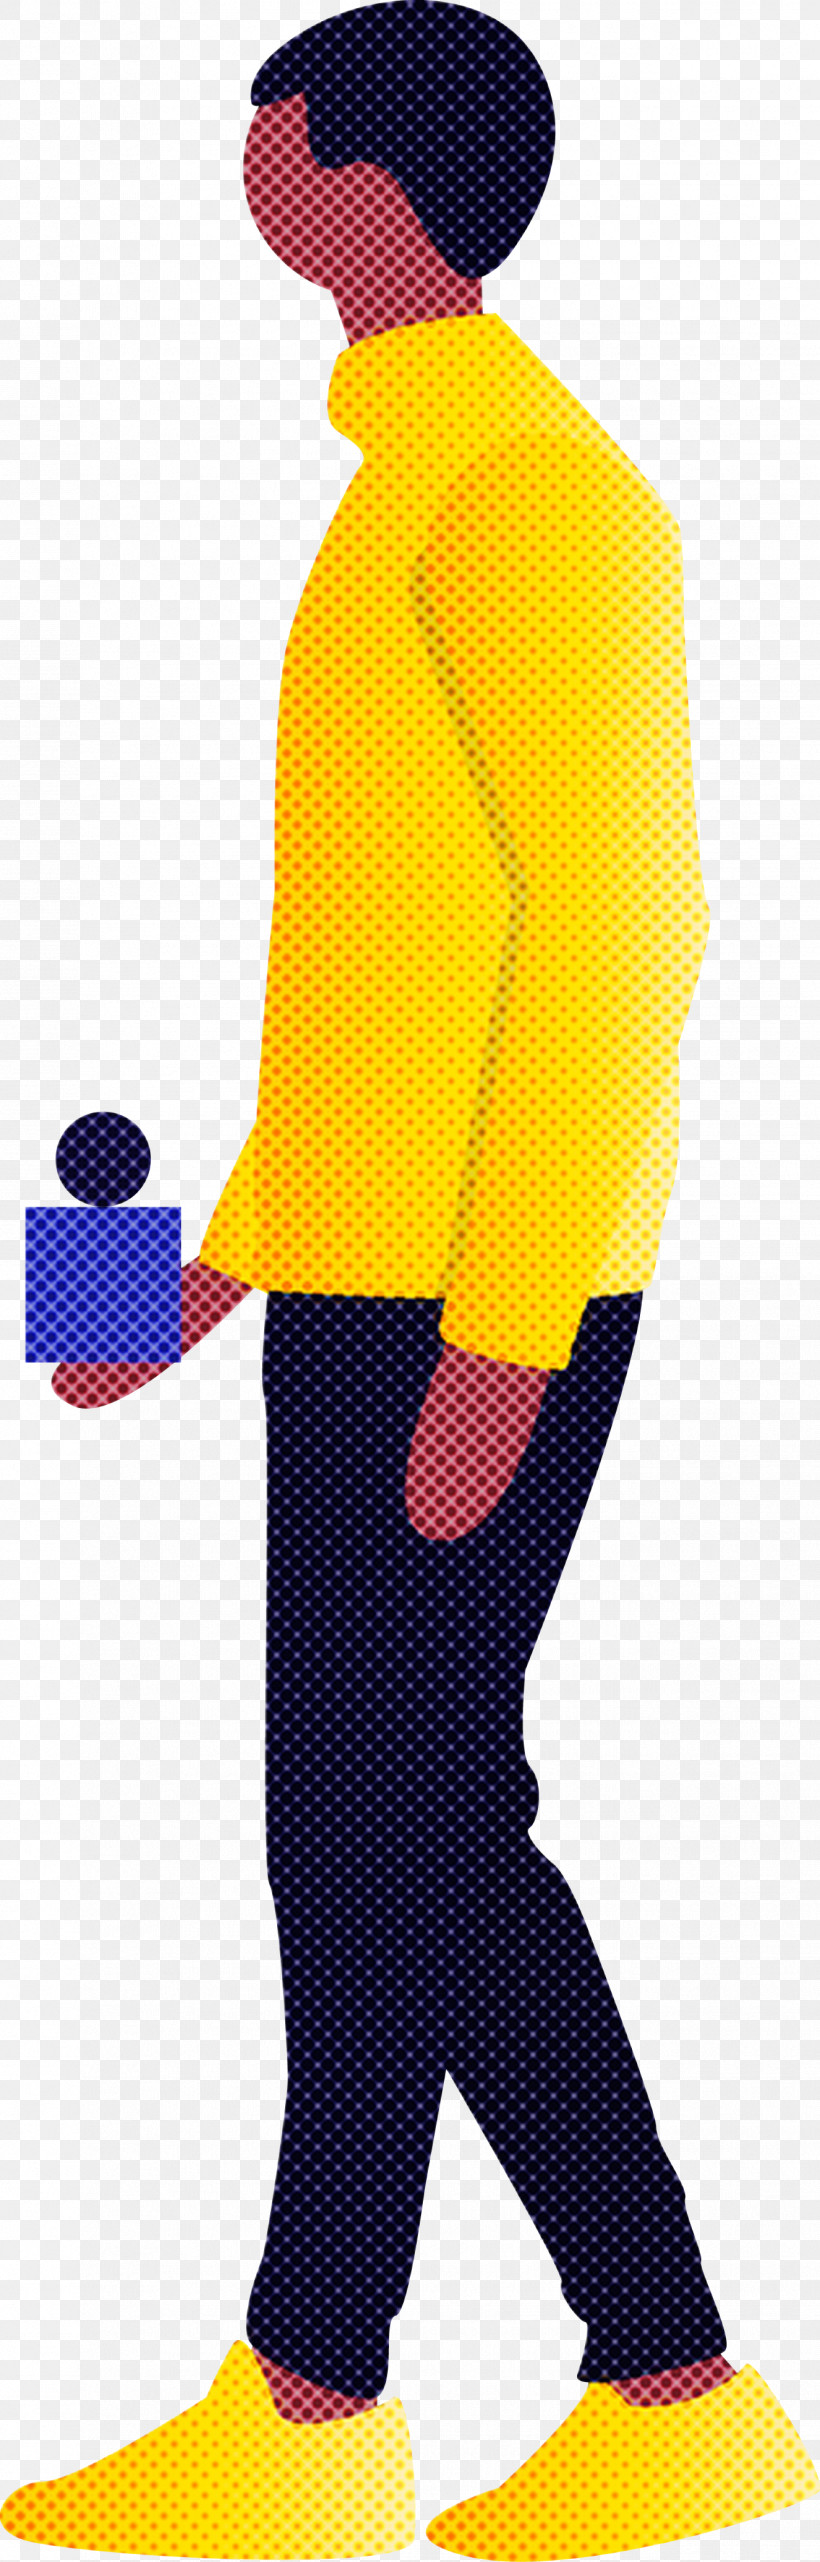 Yellow Sock Electric Blue Gesture Pattern, PNG, 1326x4143px, Cartoon Man, Electric Blue, Gesture, Sock, Yellow Download Free